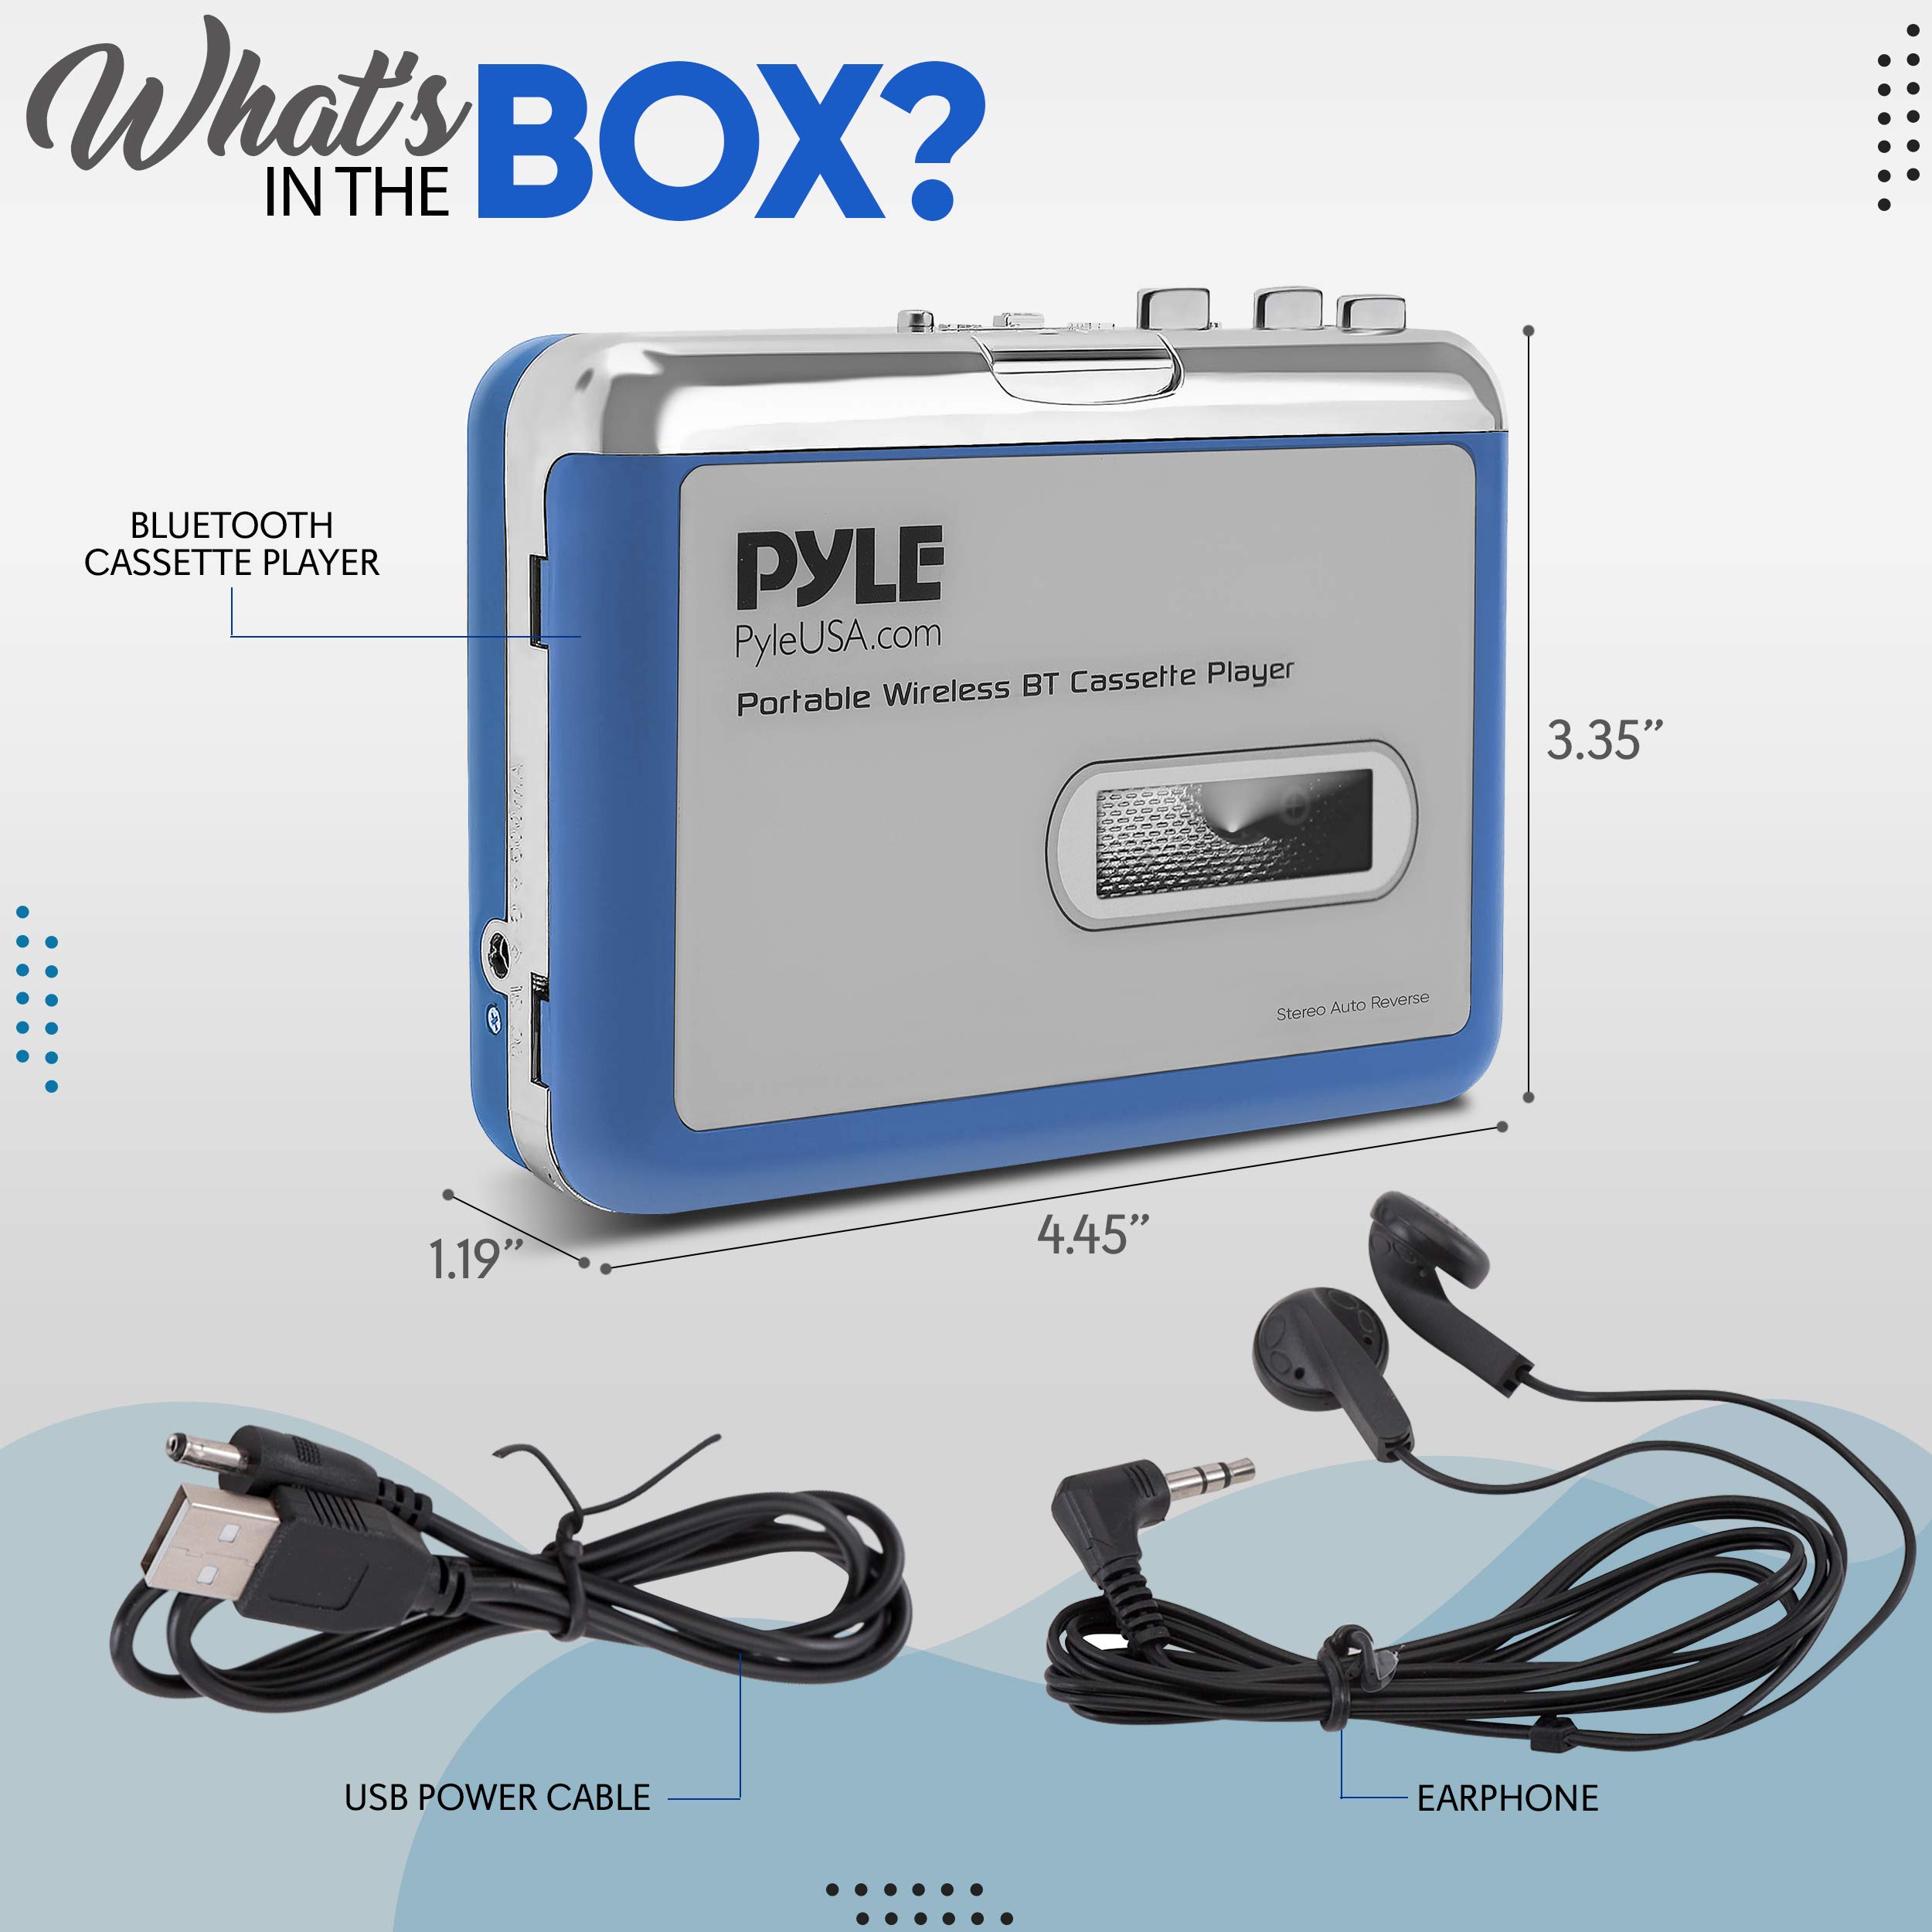 Pyle Cassette Player Bluetooth with Earphone - Tape Player Bluetooth Output to Headphone/Speaker - Includes Earphones - Bluetooth Walkman Cassette Player w/Lid Switcher, AUX Port